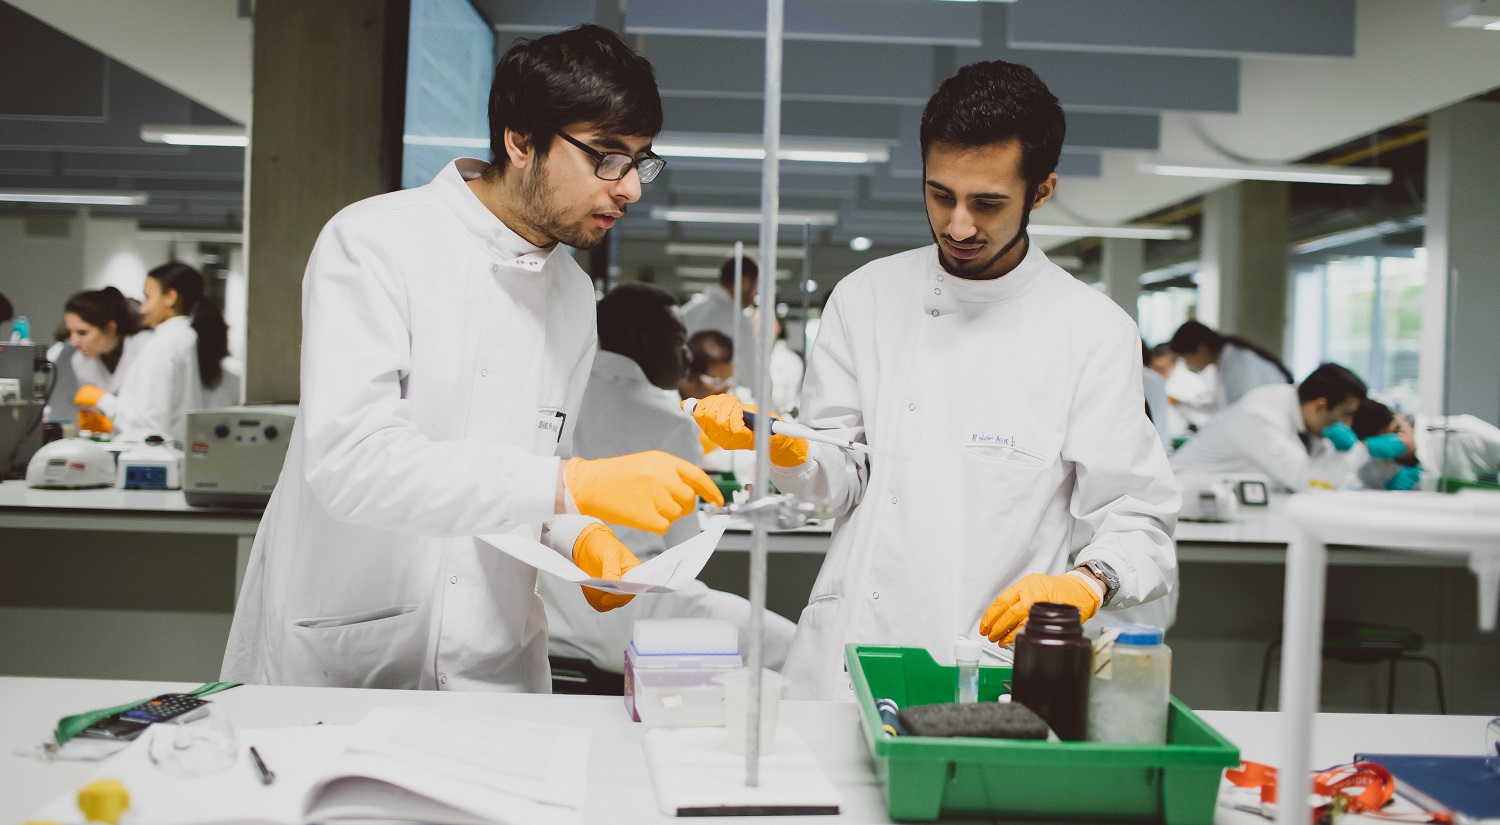 Two male students in white lab coats wearing yellow gloves. One holds a large pipette in his right hand, the other is holding a piece of paper and pointing towards something on the lab bench in front of them. A green plastic tray with bottles and jars is in the foreground.